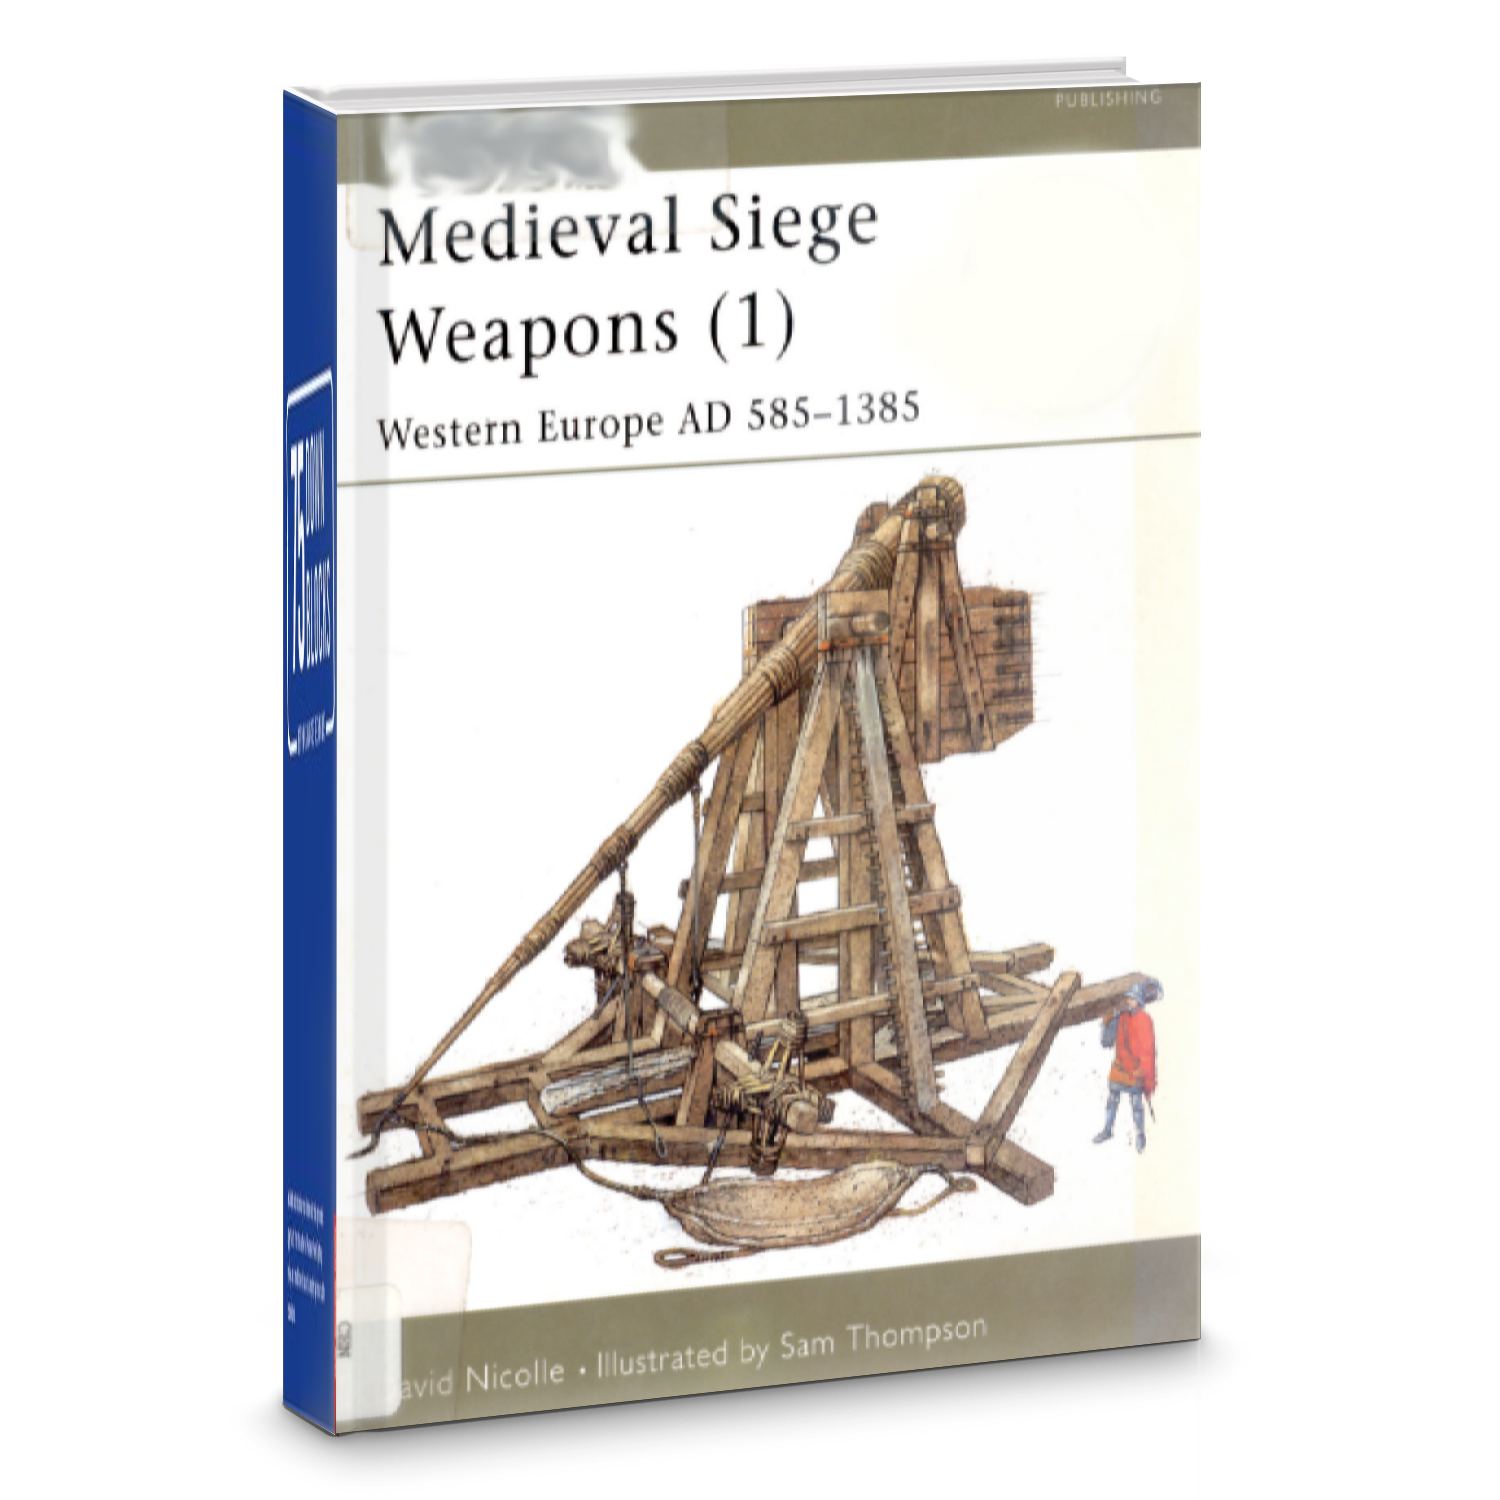 Book: Siege Weapons of Medieval Europe